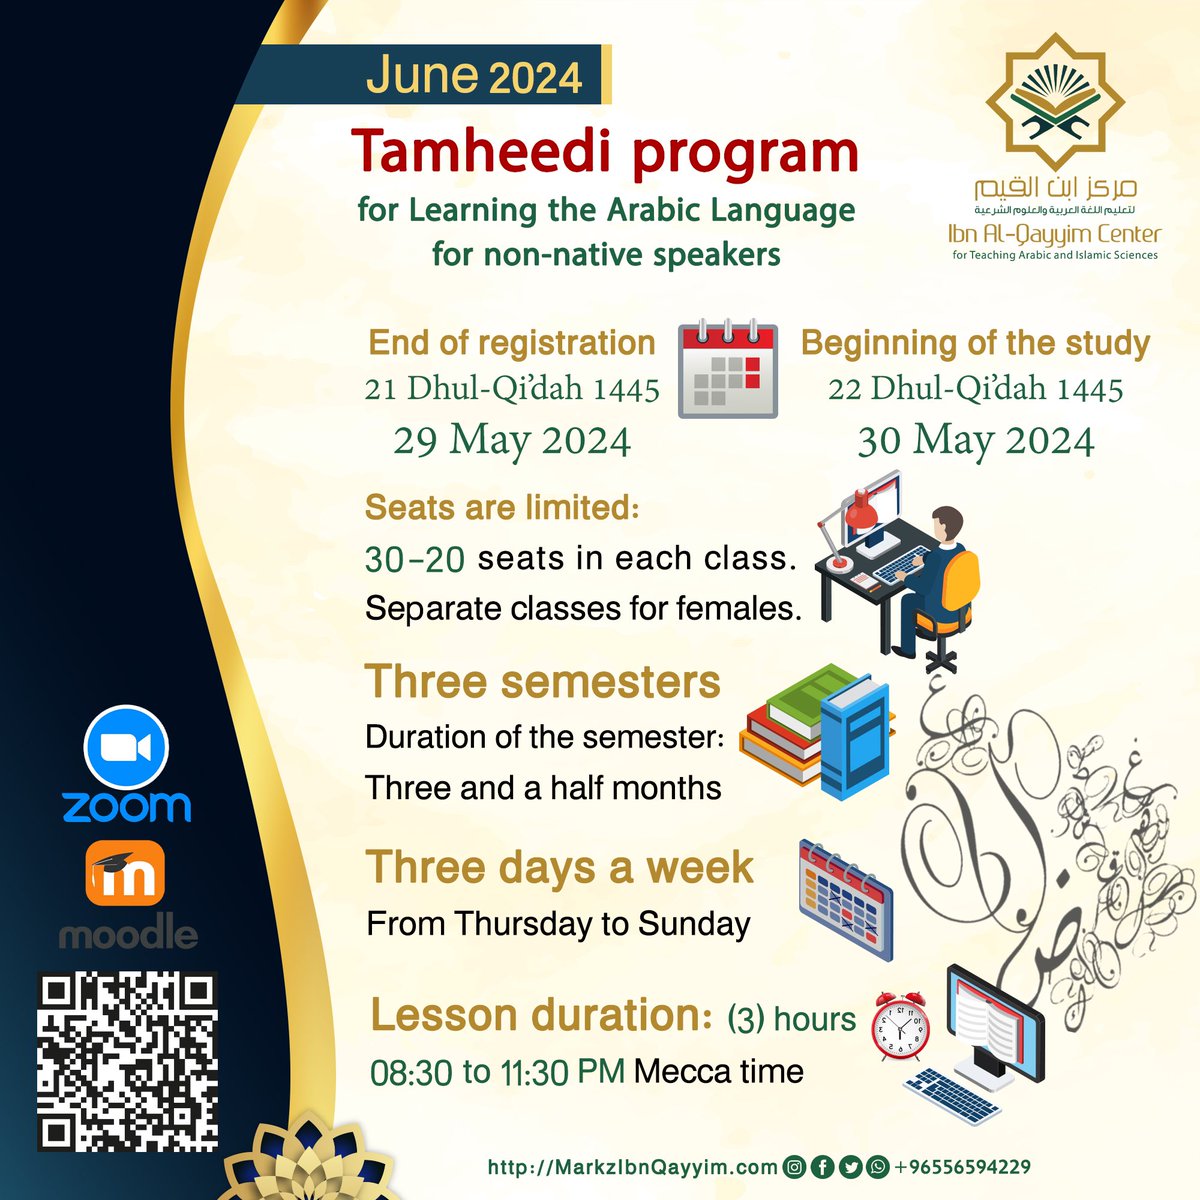 🔜 Tamheedi Program 📚✨
for Learning the Arabic Language and Islamic Sciences for non-native speakers.

📅 Registration start: 1 April 2024
📆 End of registration: 29 May 2024
🗓️ Beginning of the study: 30 May 2024

🔎 The center is under the supervision of :
☑️ Dr. Khalid bin